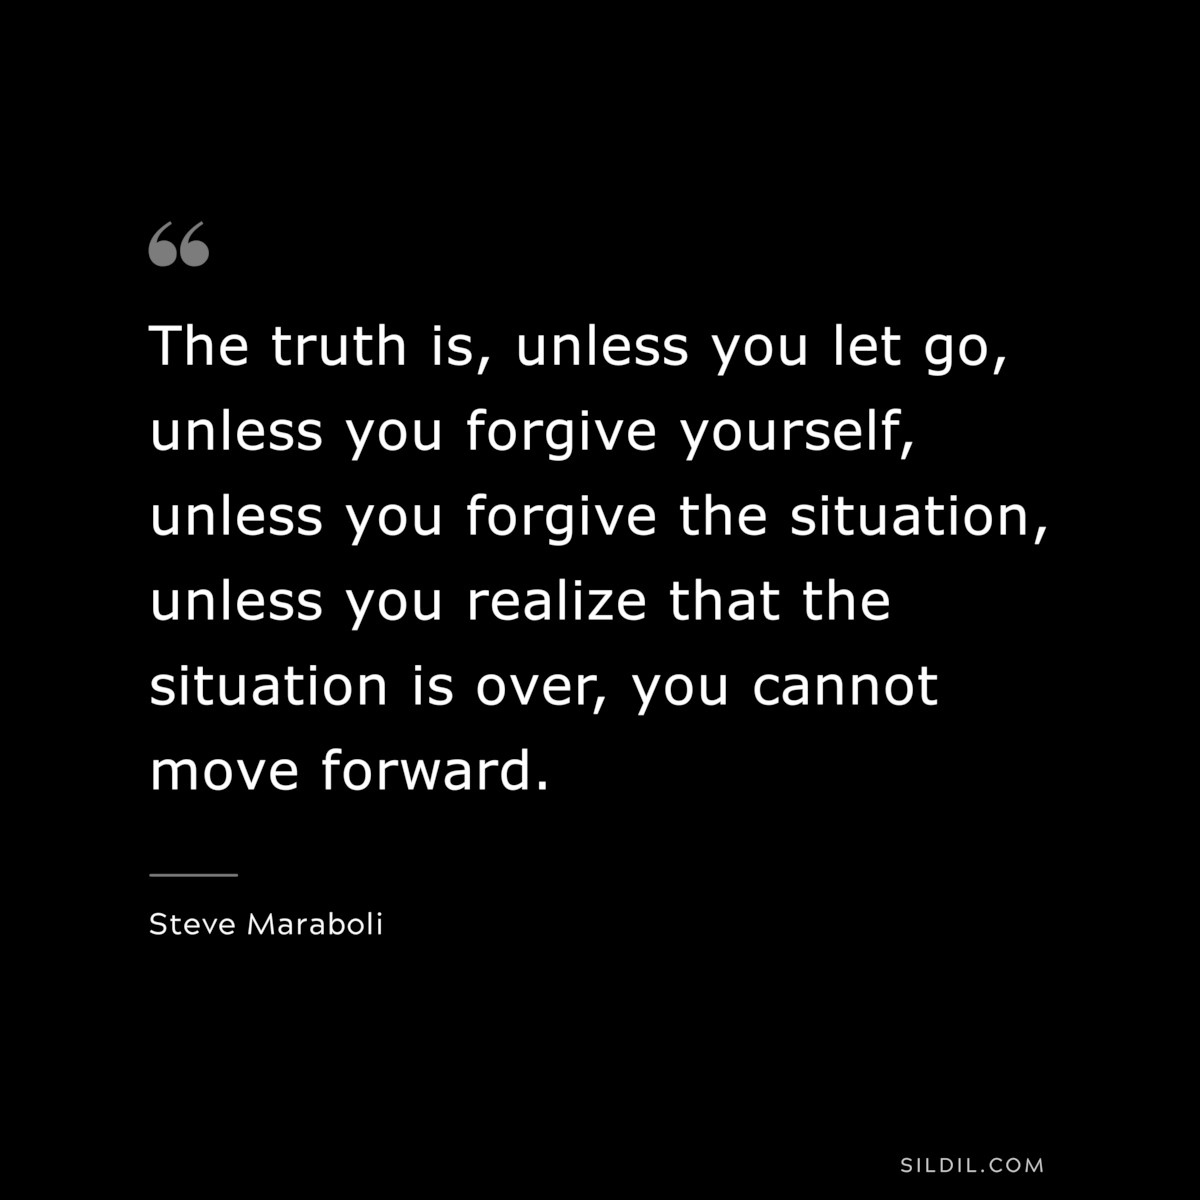 The truth is, unless you let go, unless you forgive yourself, unless you forgive the situation, unless you realize that the situation is over, you cannot move forward. ― Steve Maraboli